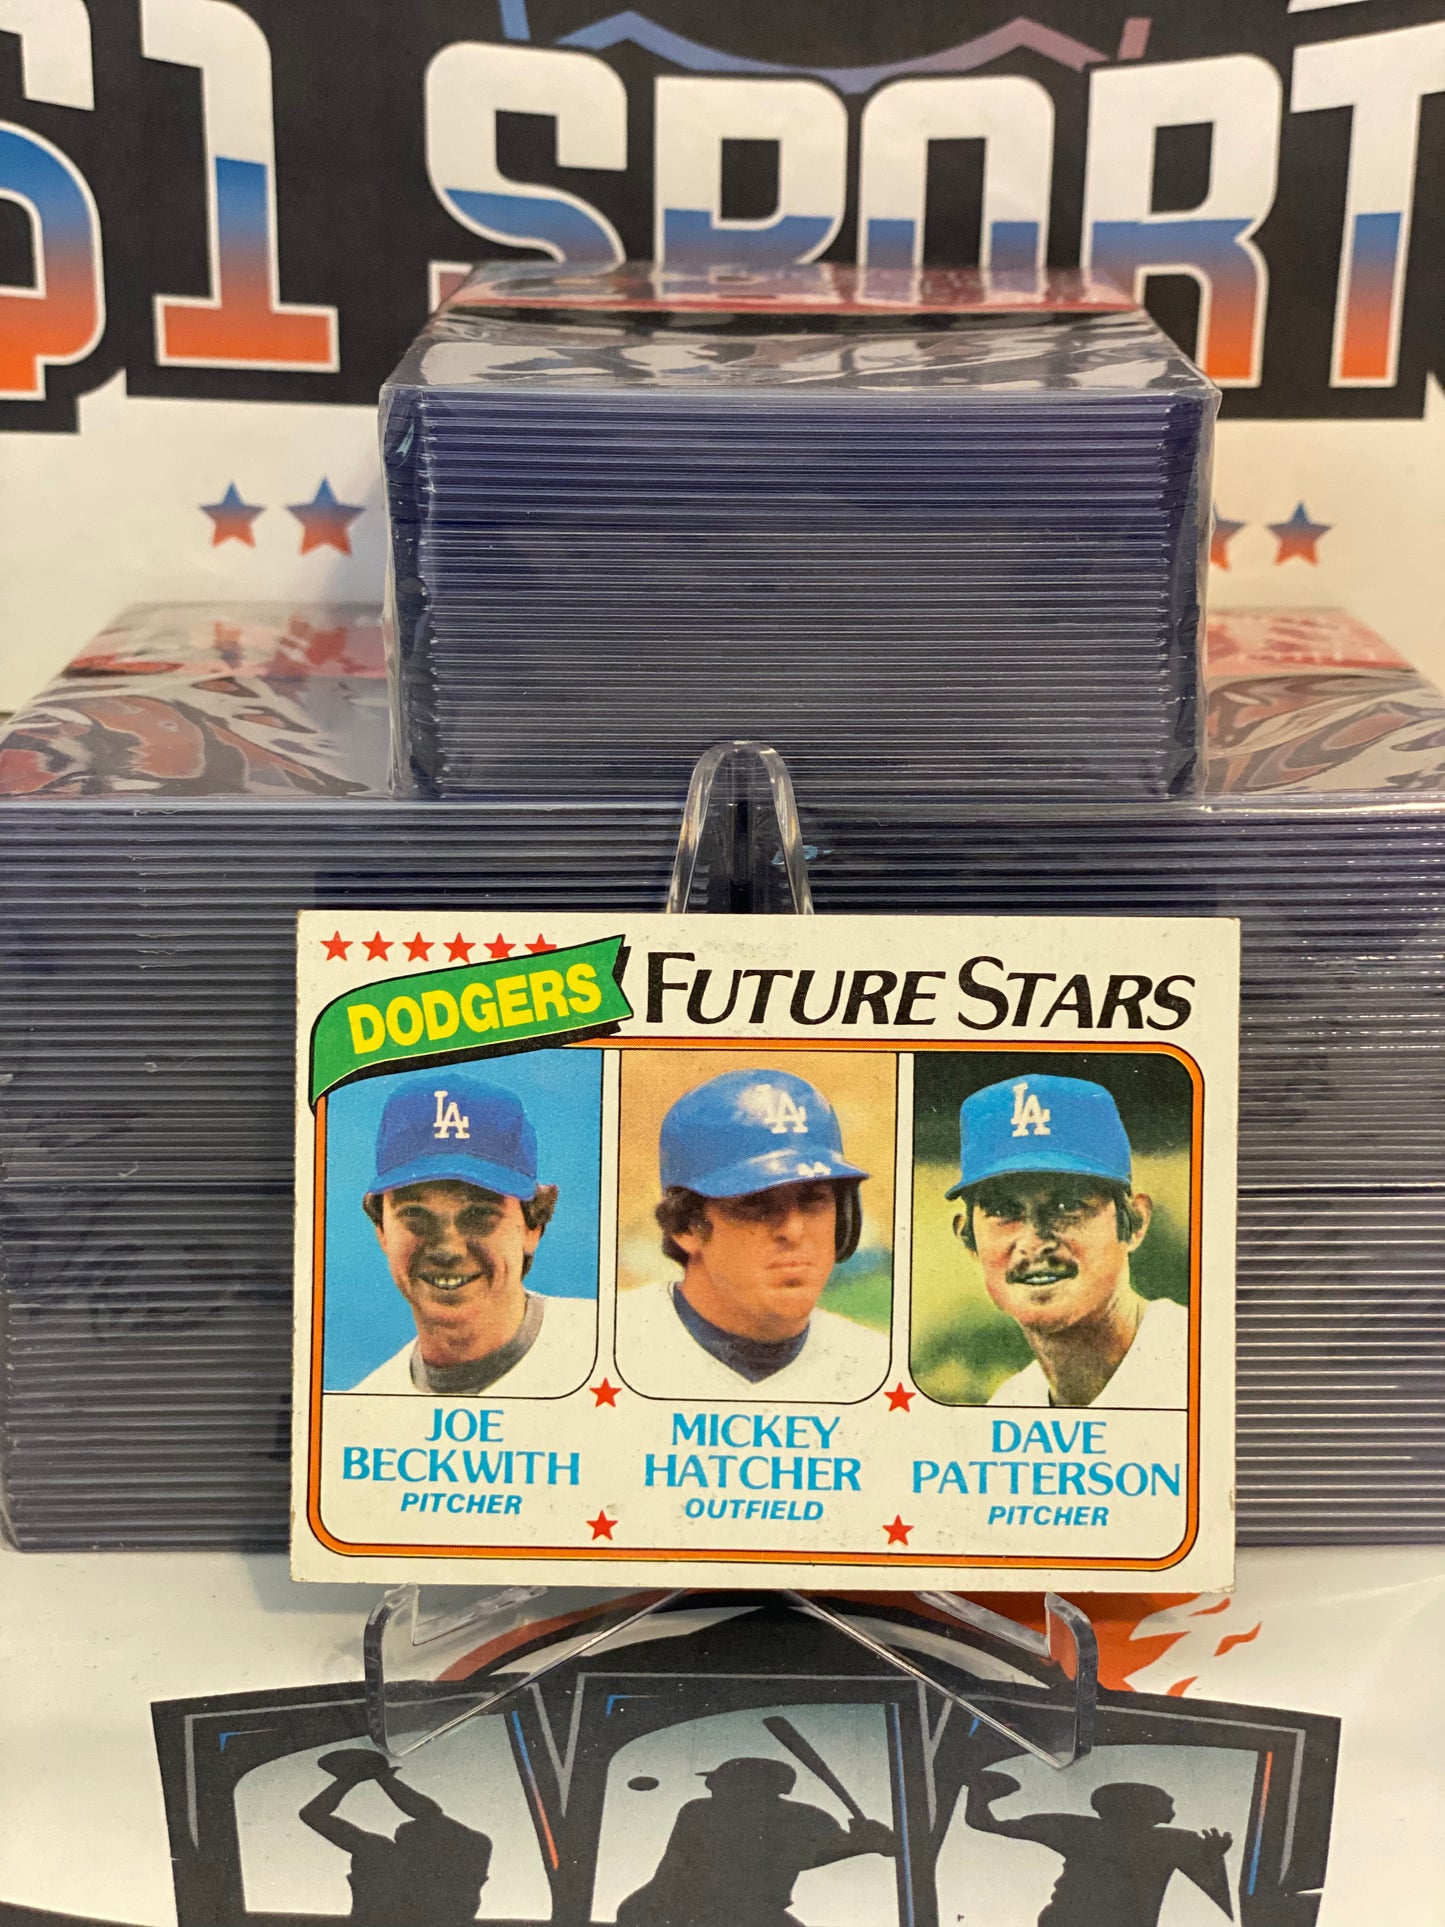 1980 Topps (Dodgers Future Stars) Joe Beckwith, Mickey Hatcher & Dave Patterson #679